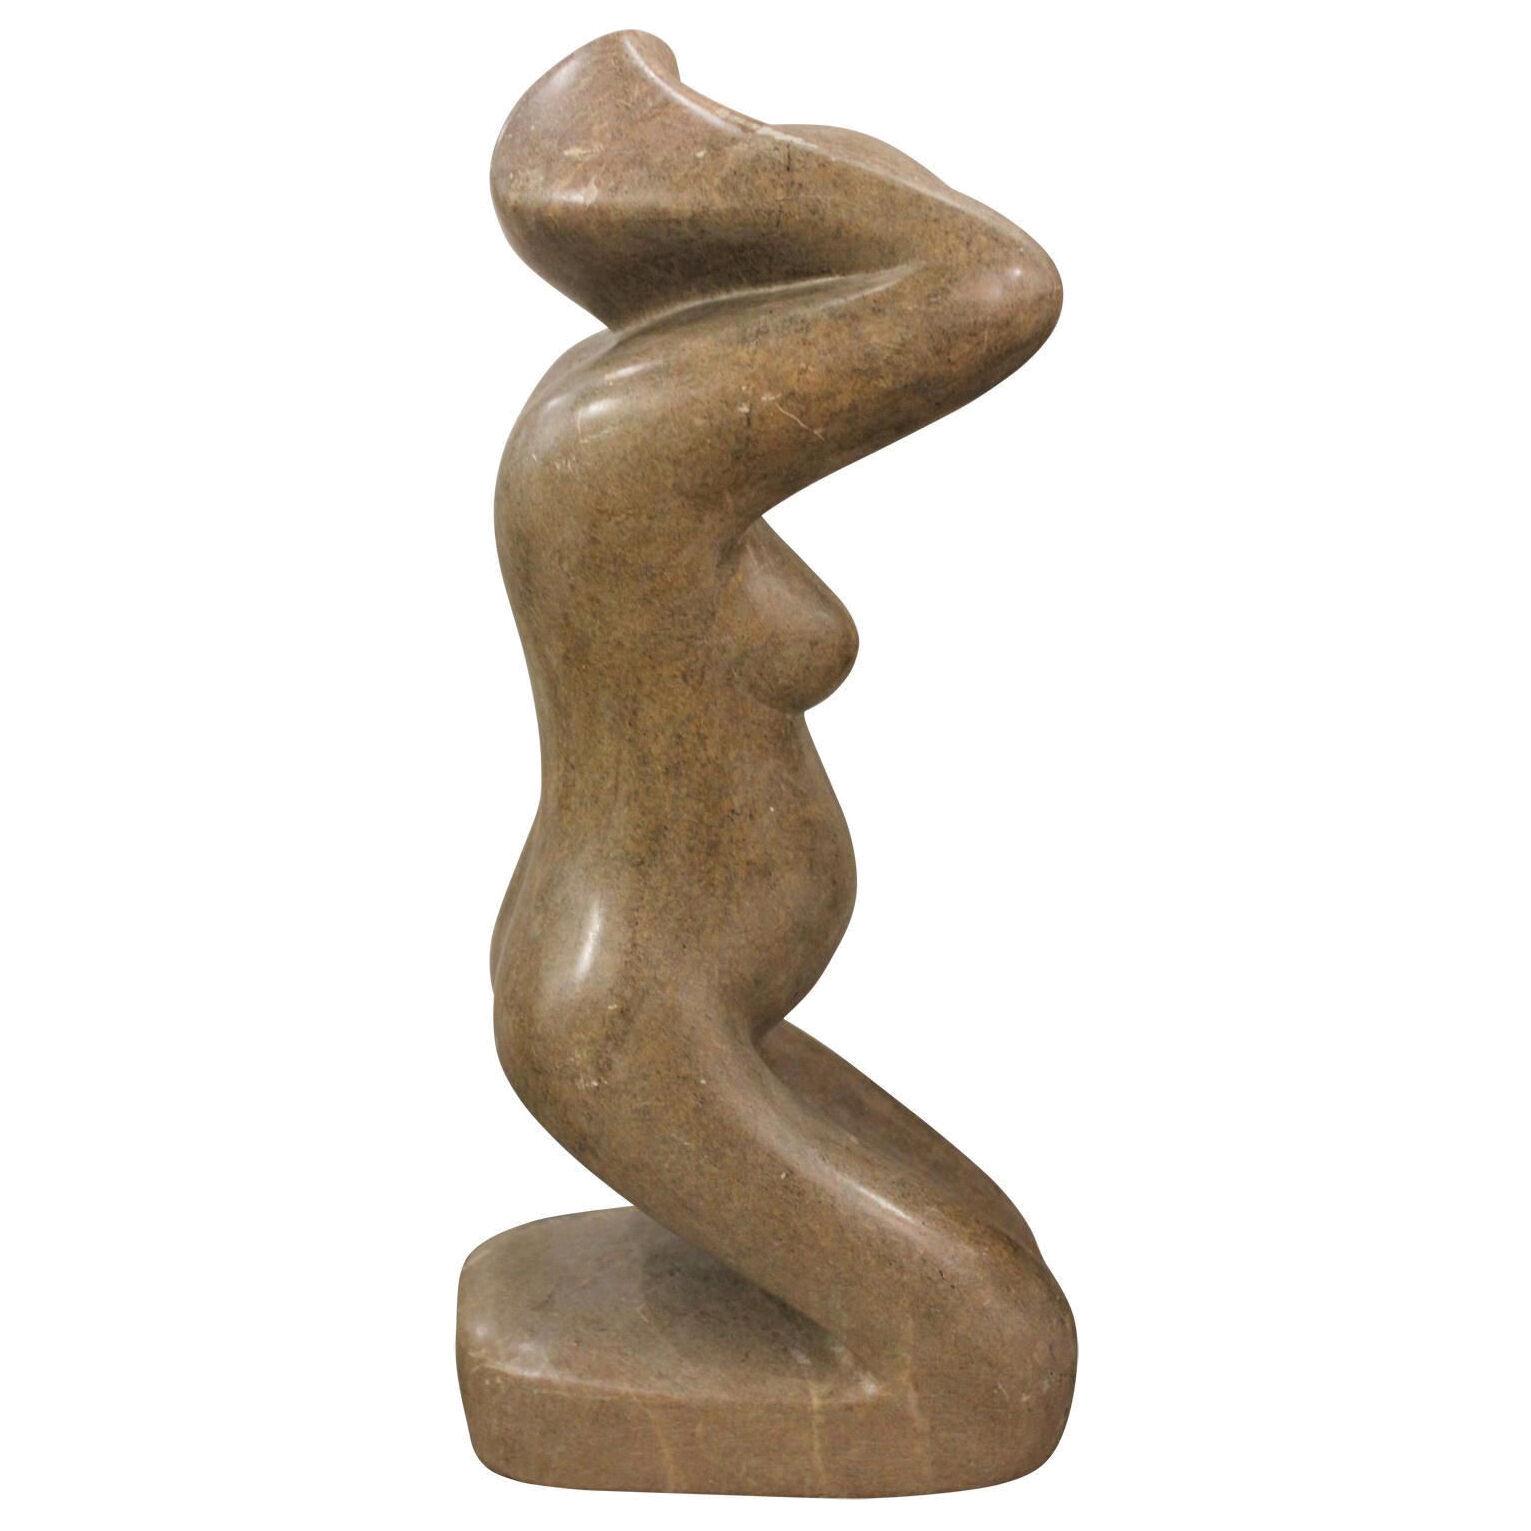 No Title Milton Goldin Seated Figure of a Women Stone Abstract Sculpture 1989